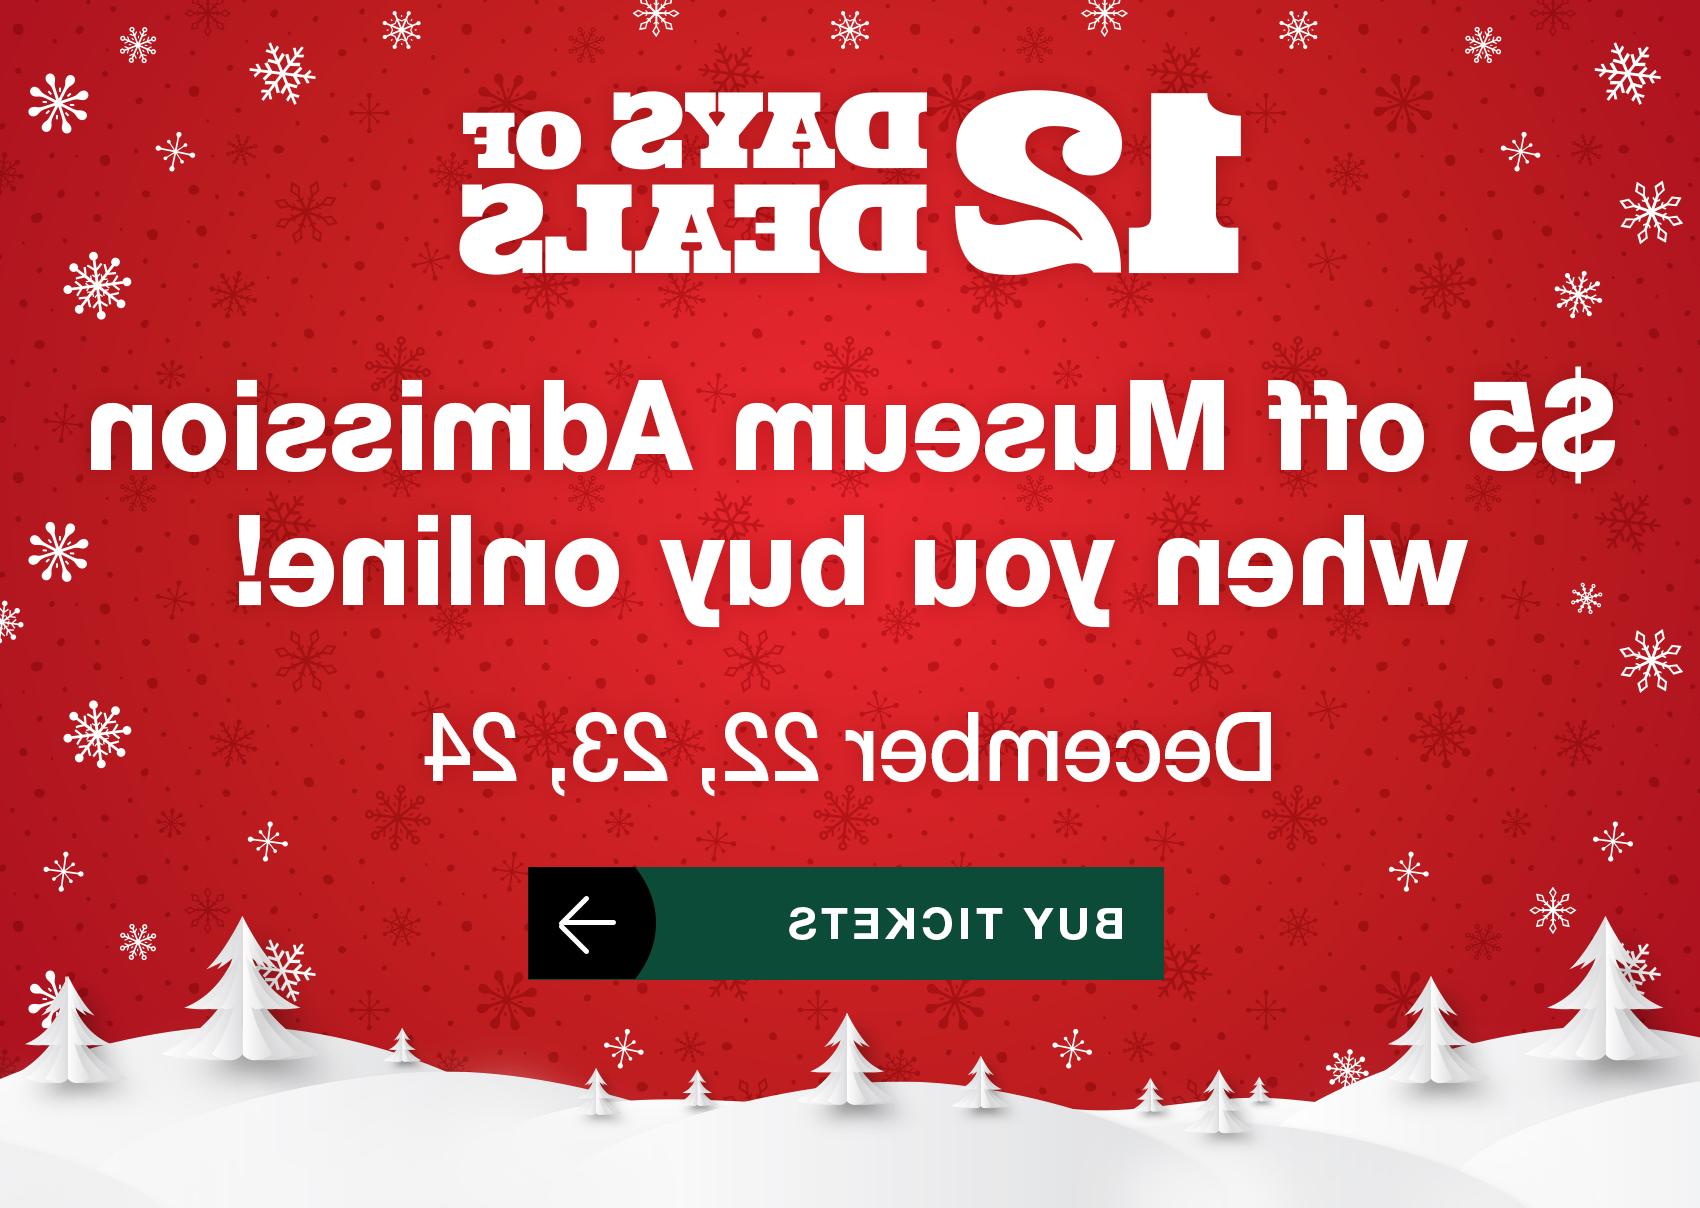 12 Days of Deals! $5 off Museum Admission when you buy online! December 22, 23, 24. Buy 票.